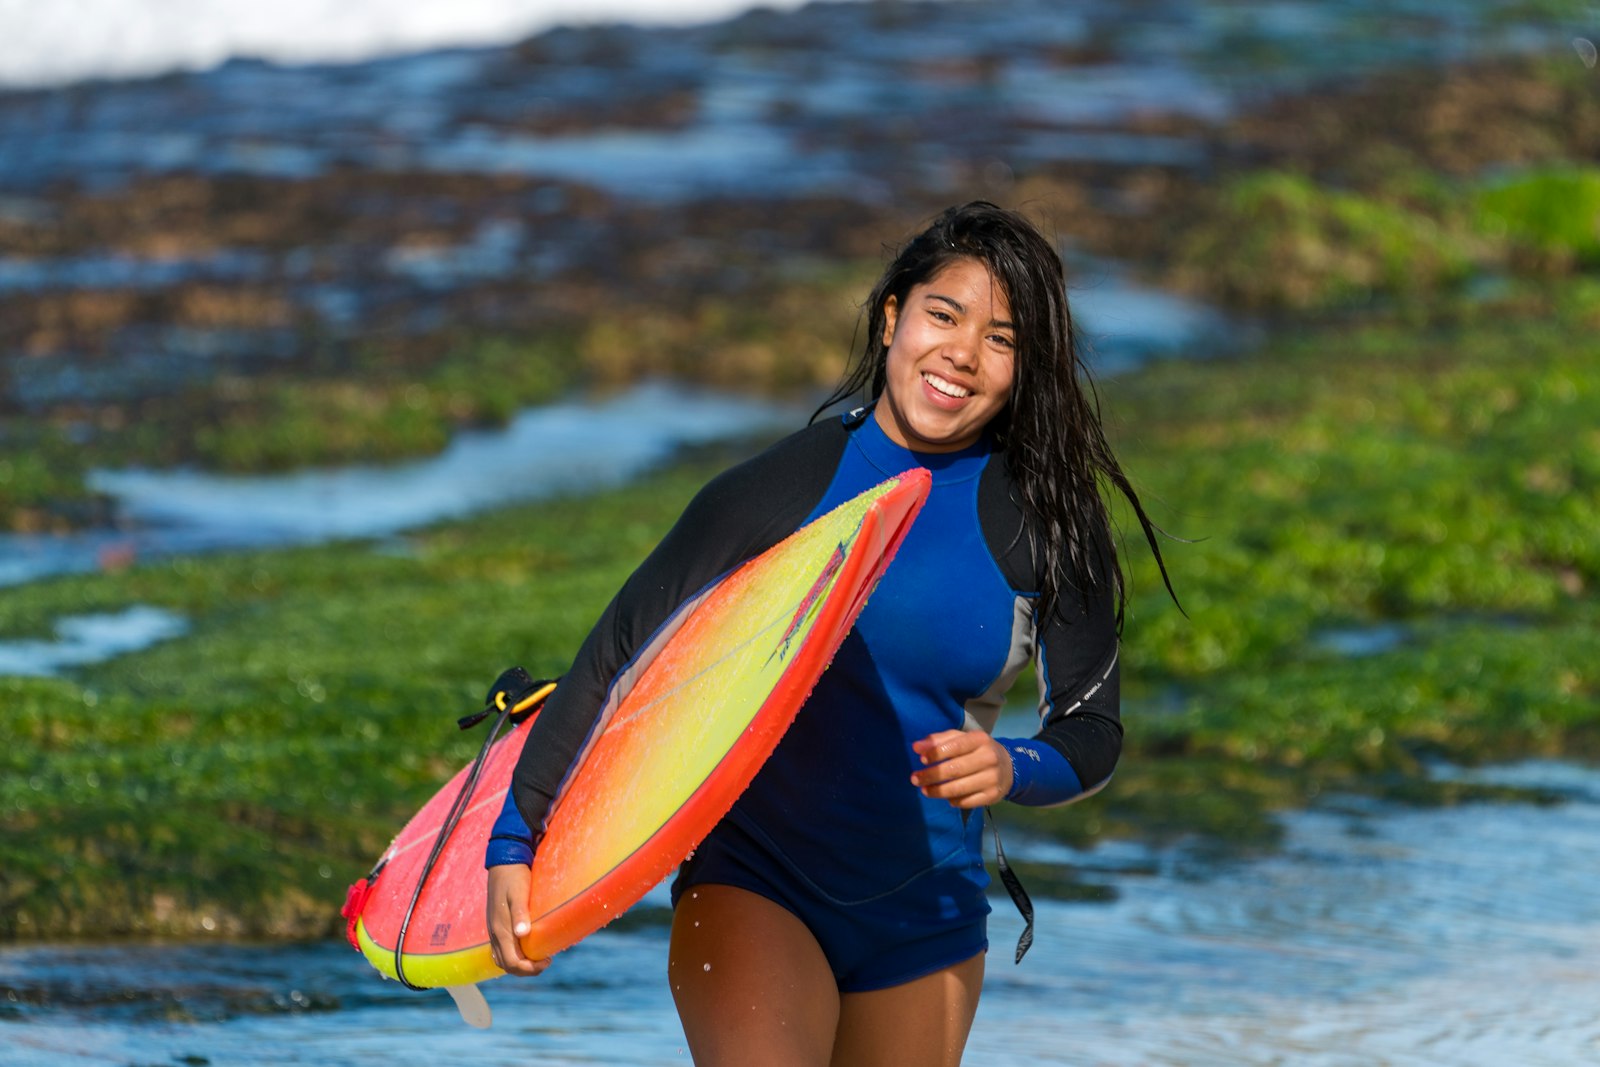 Sony a9 sample photo. Smiling woman carrying surfboard photography